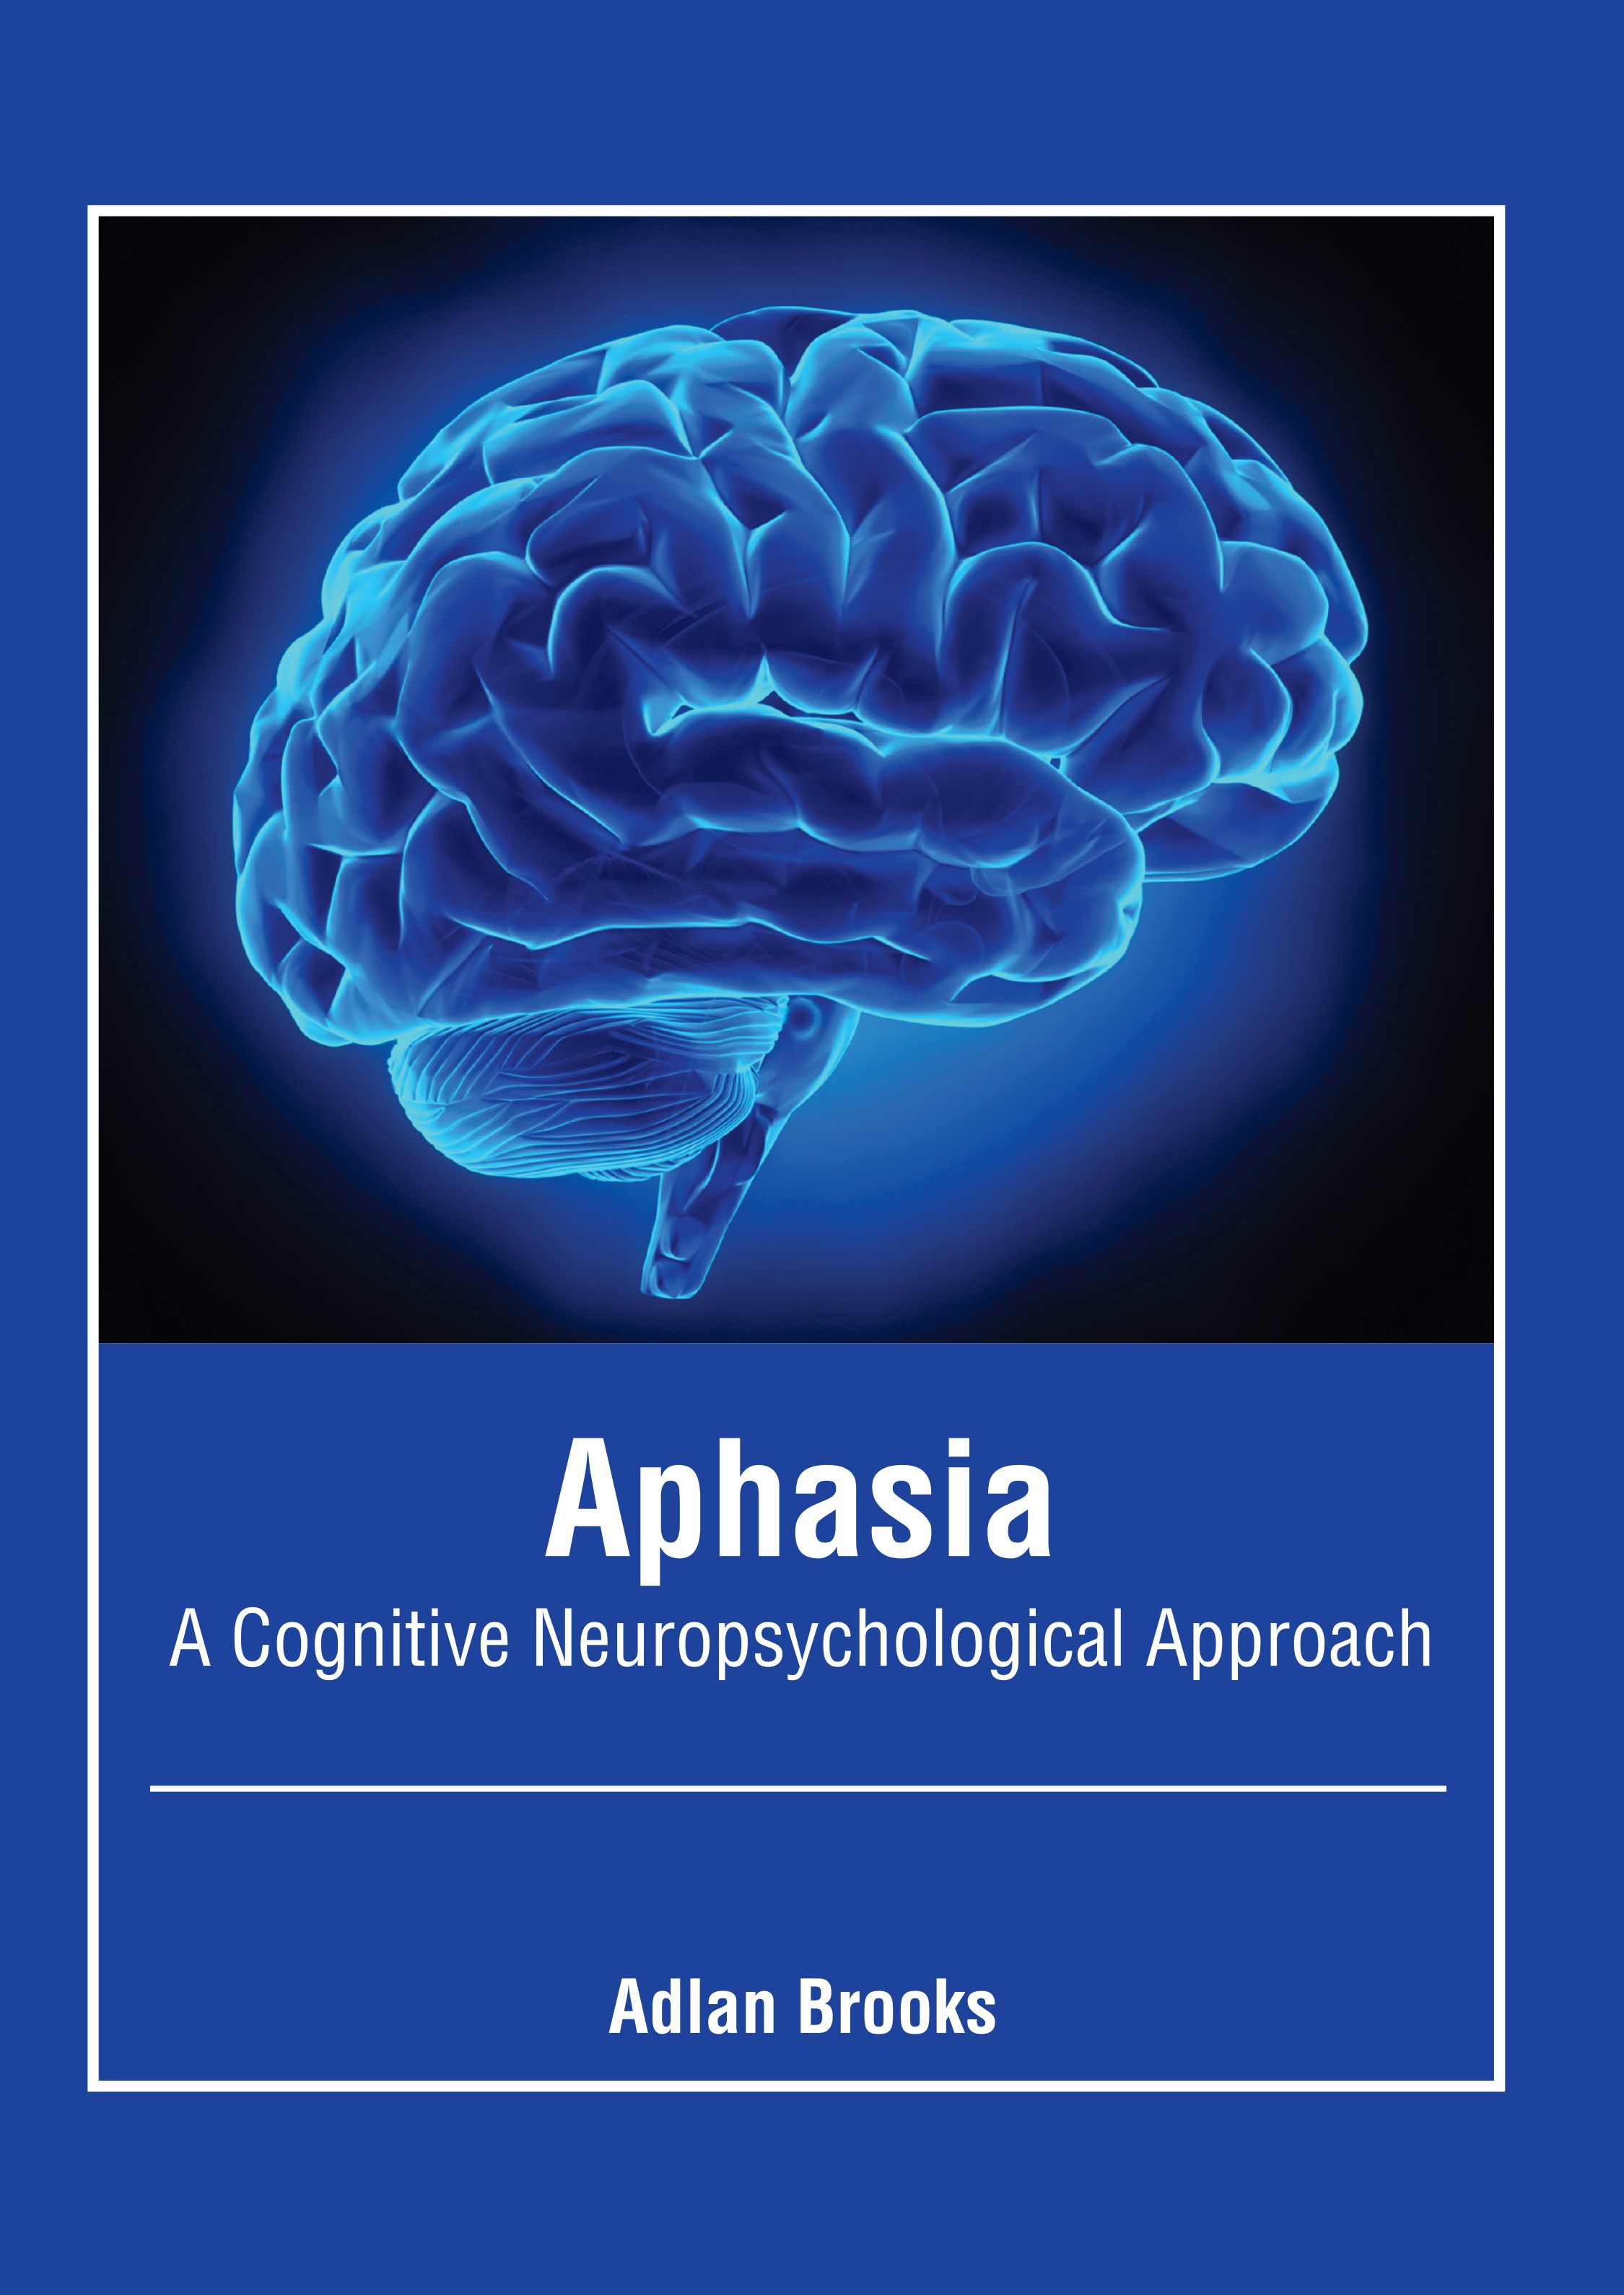 APHASIA: A COGNITIVE NEUROPSYCHOLOGICAL APPROACH